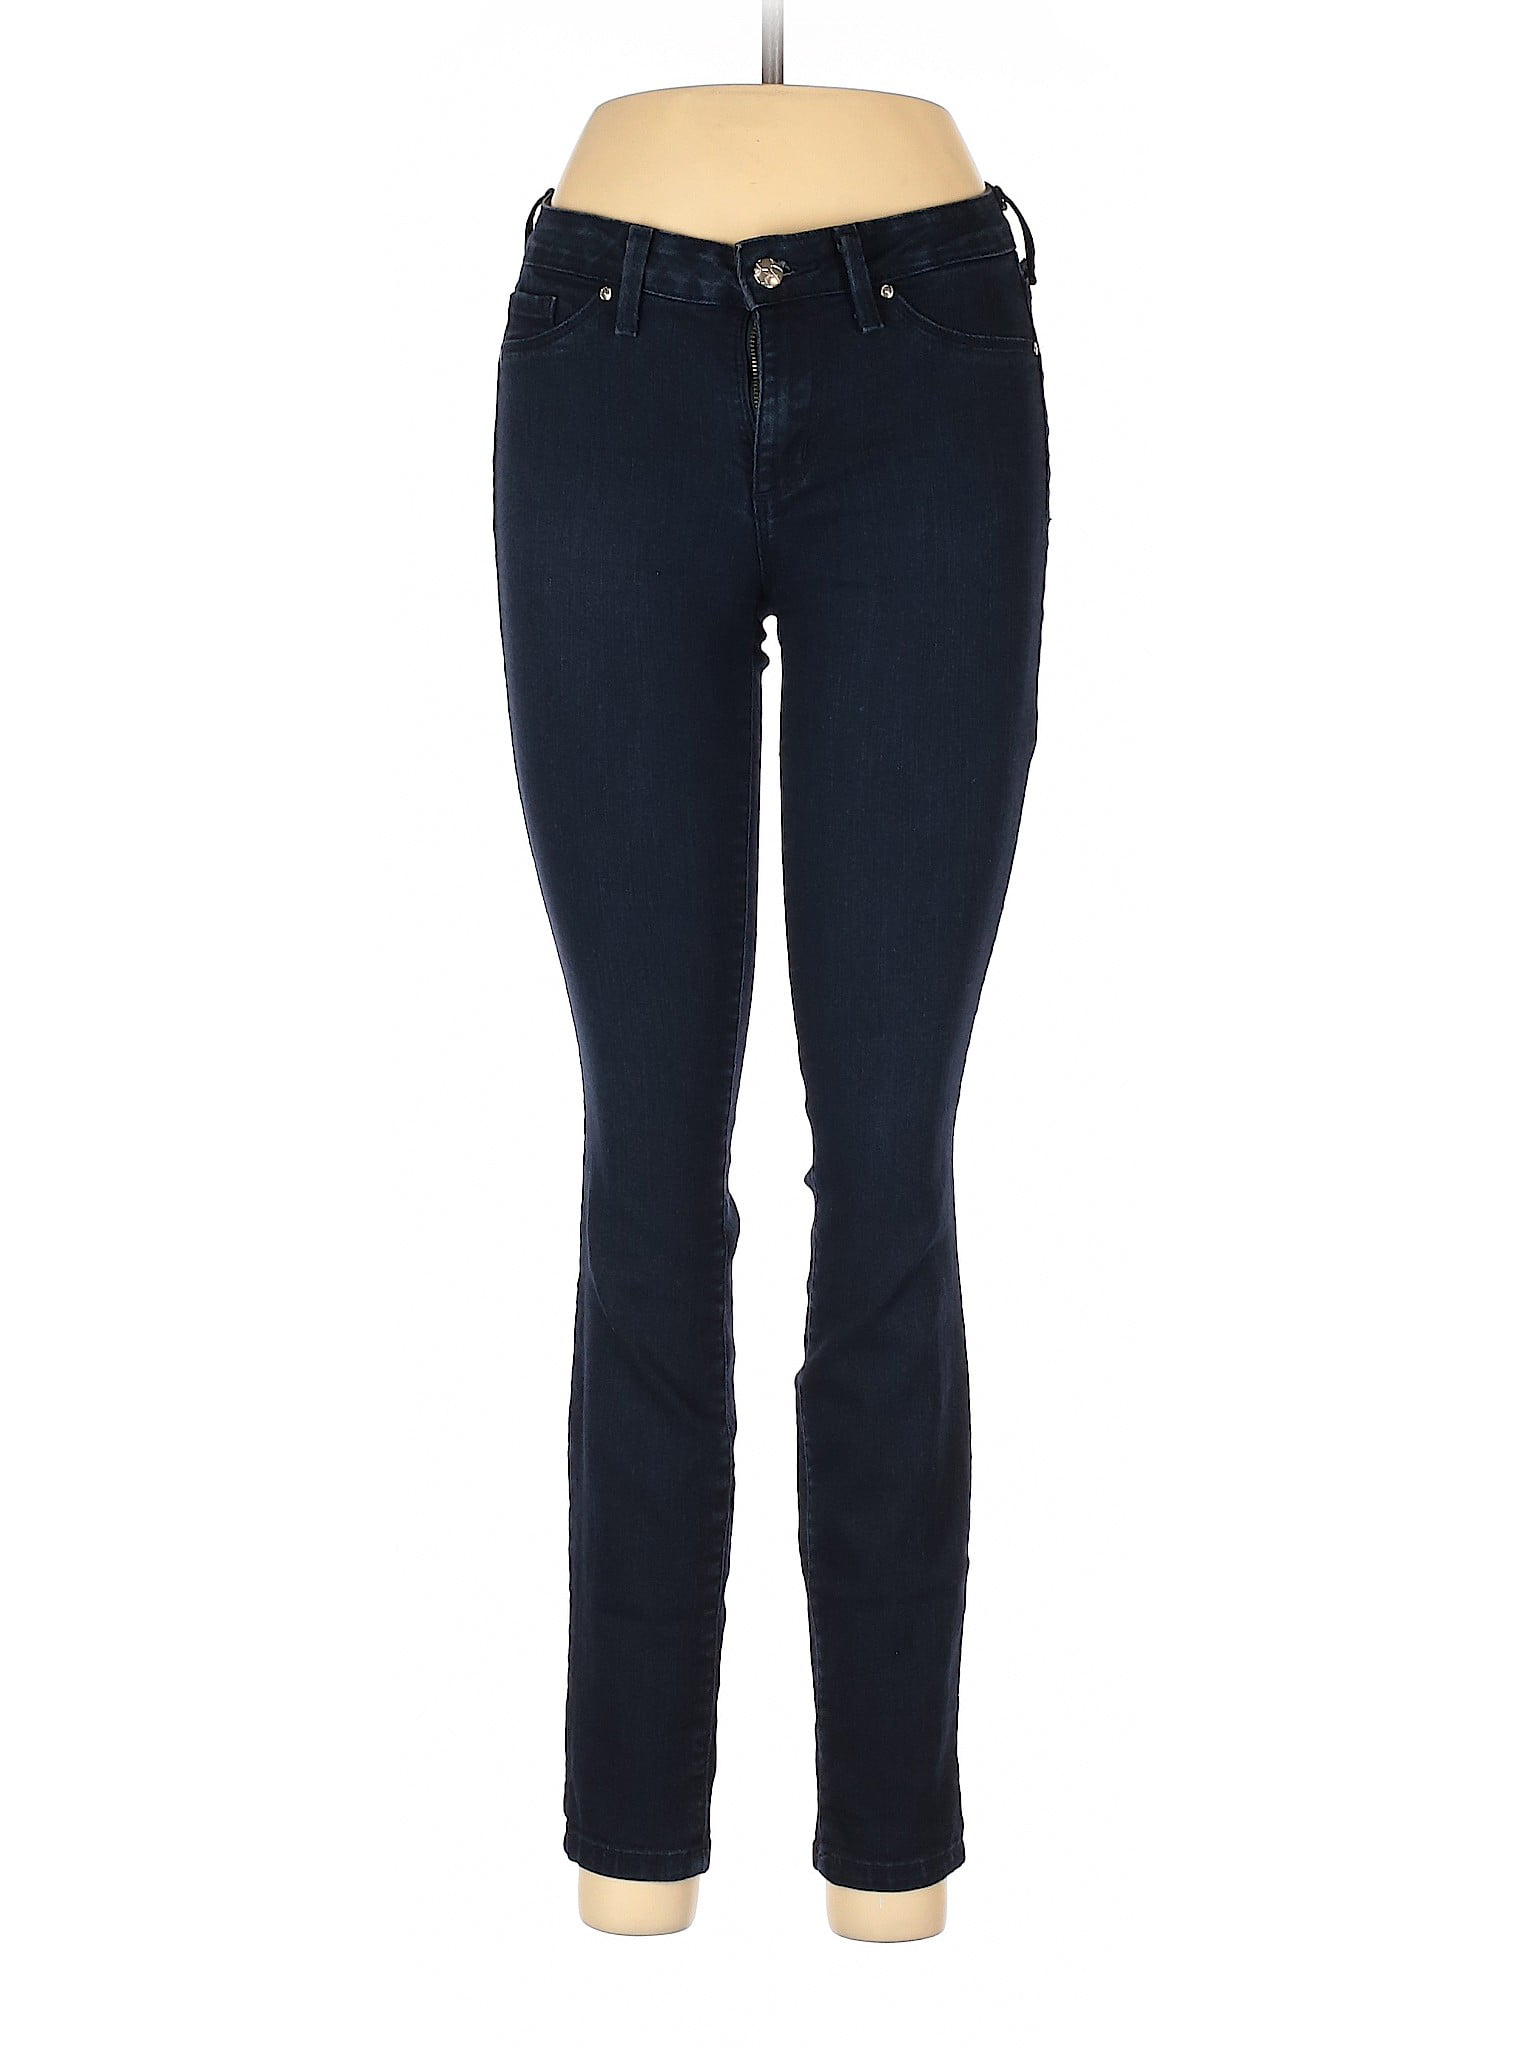 Jessica Simpson - Pre-Owned Jessica Simpson Women's Size 28W Jeans ...